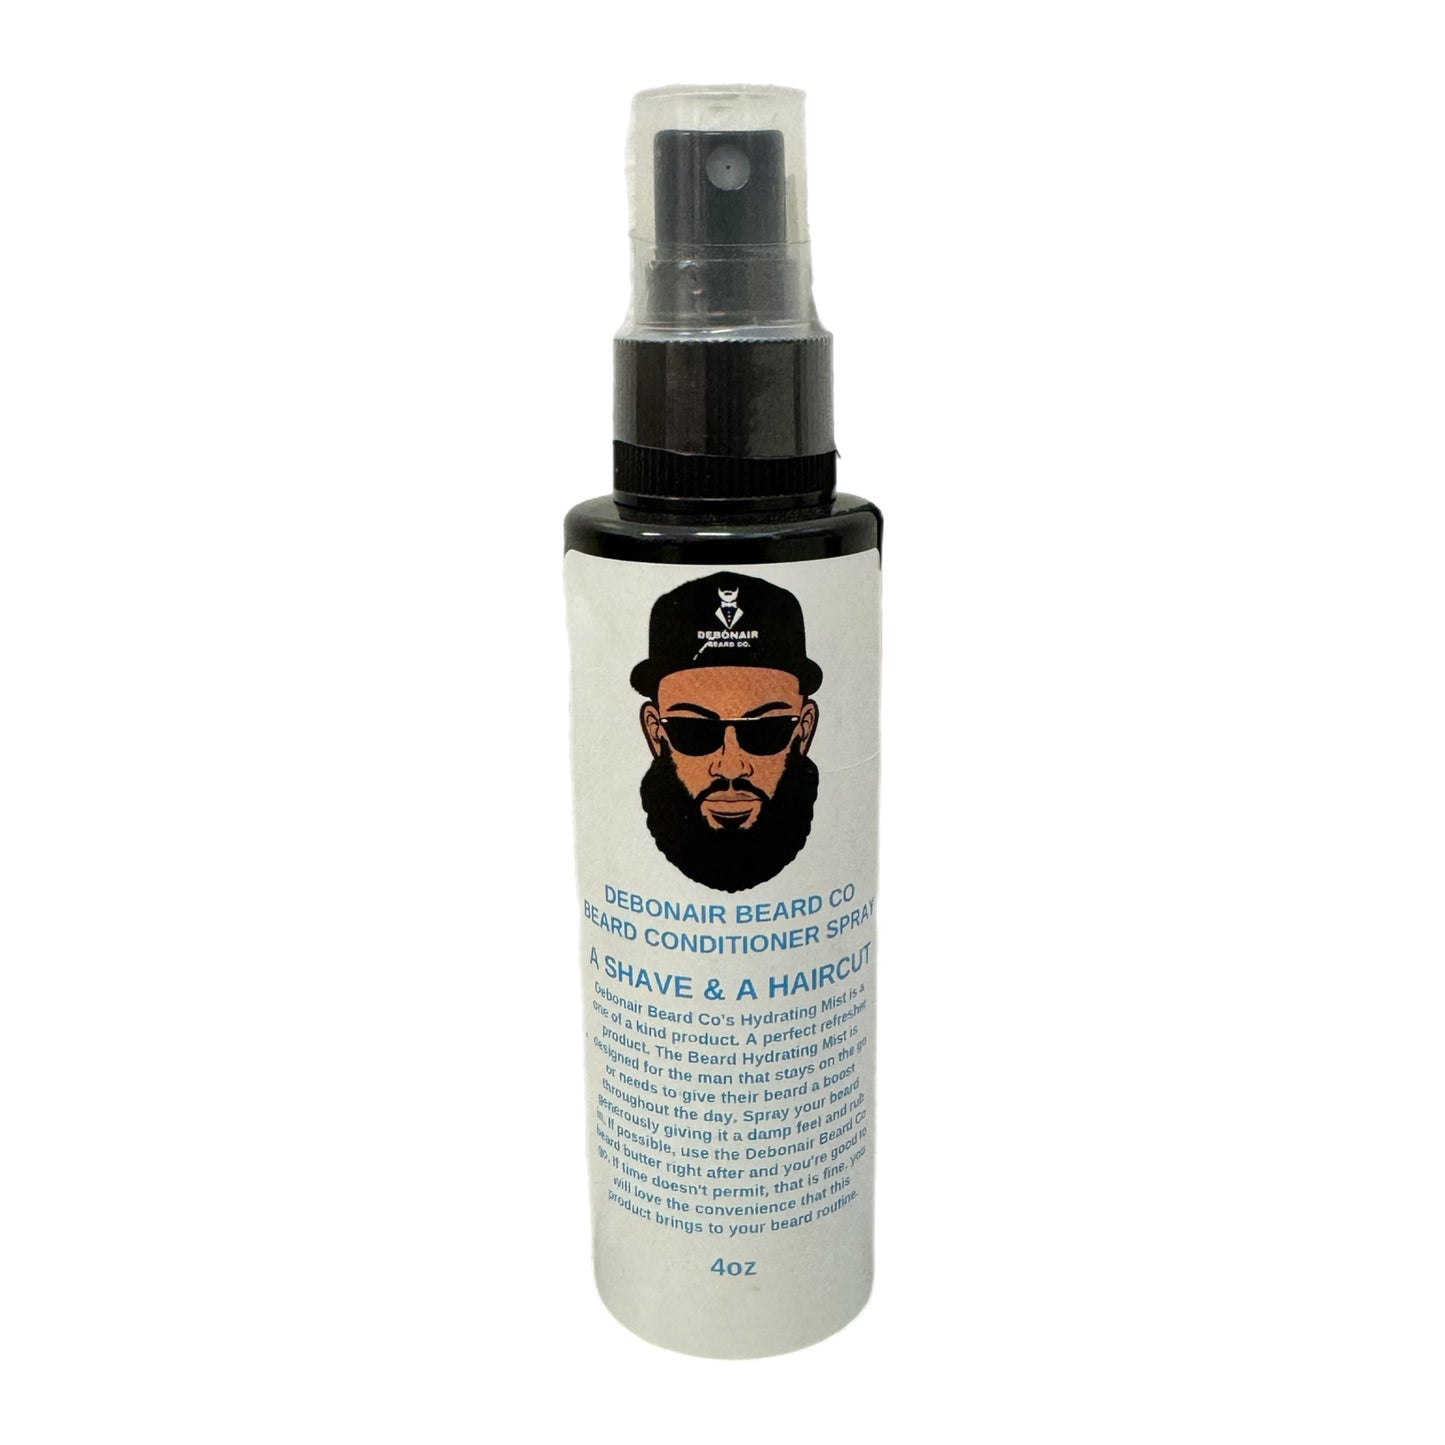 Beard Conditioning Spray (A Shave & A Haircut)